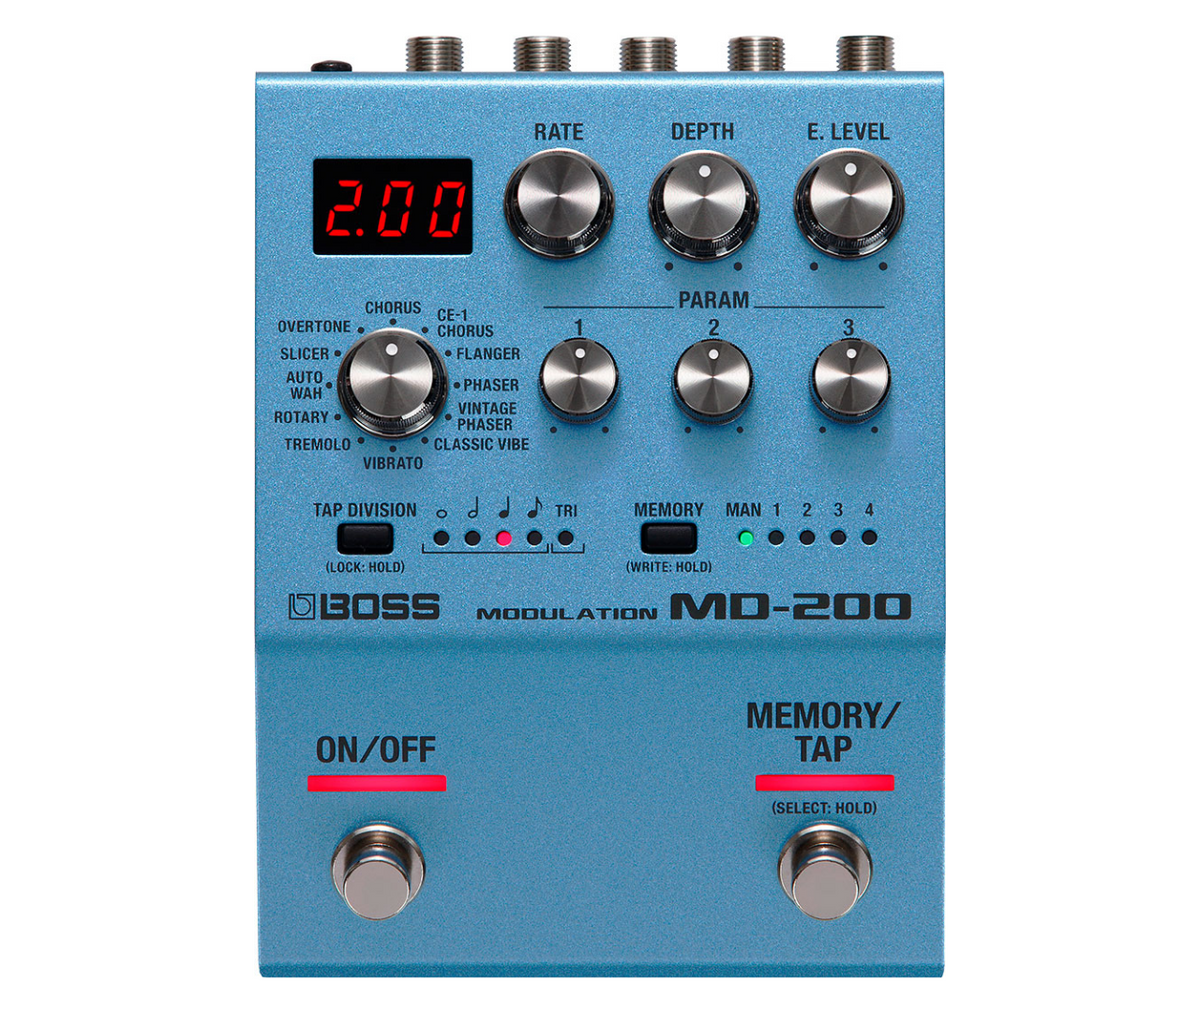 BOSS MD-200 Modulation Best Guitar Effects Pedal with 12 Modulation Modes Class-leading Sound Quality